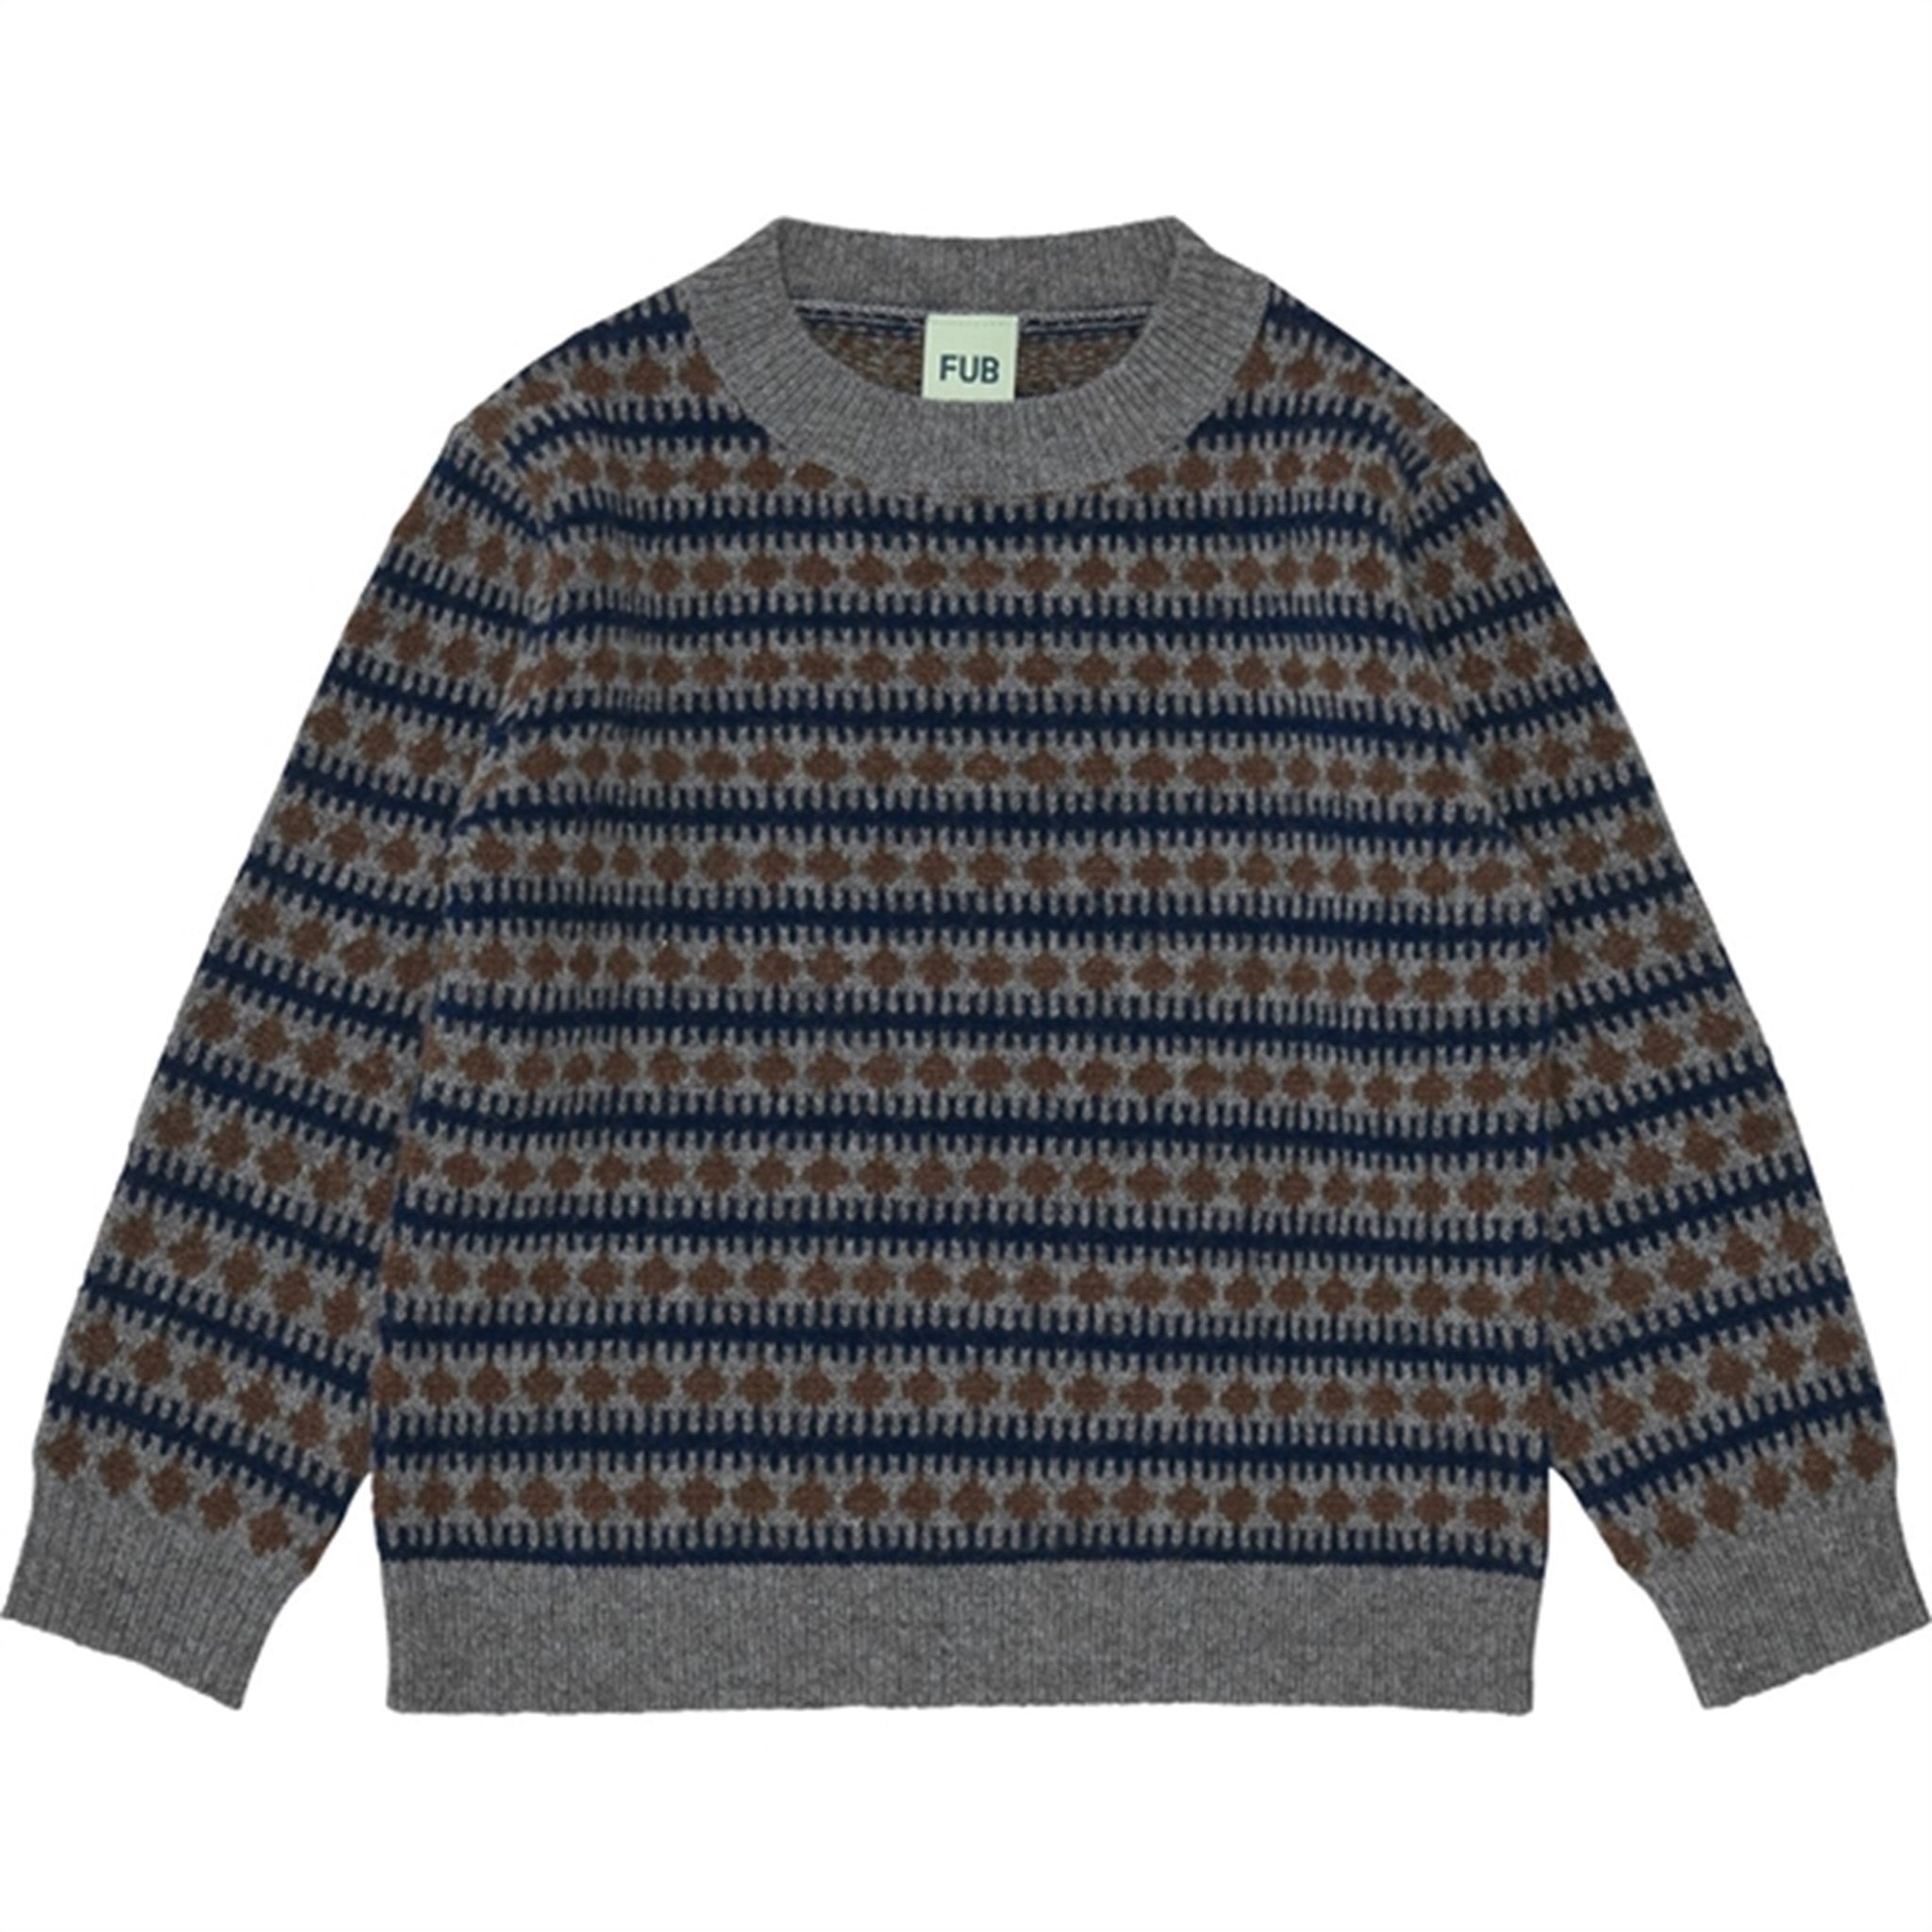 FUB Lambswool Knitted Sweater Charcoal Melange